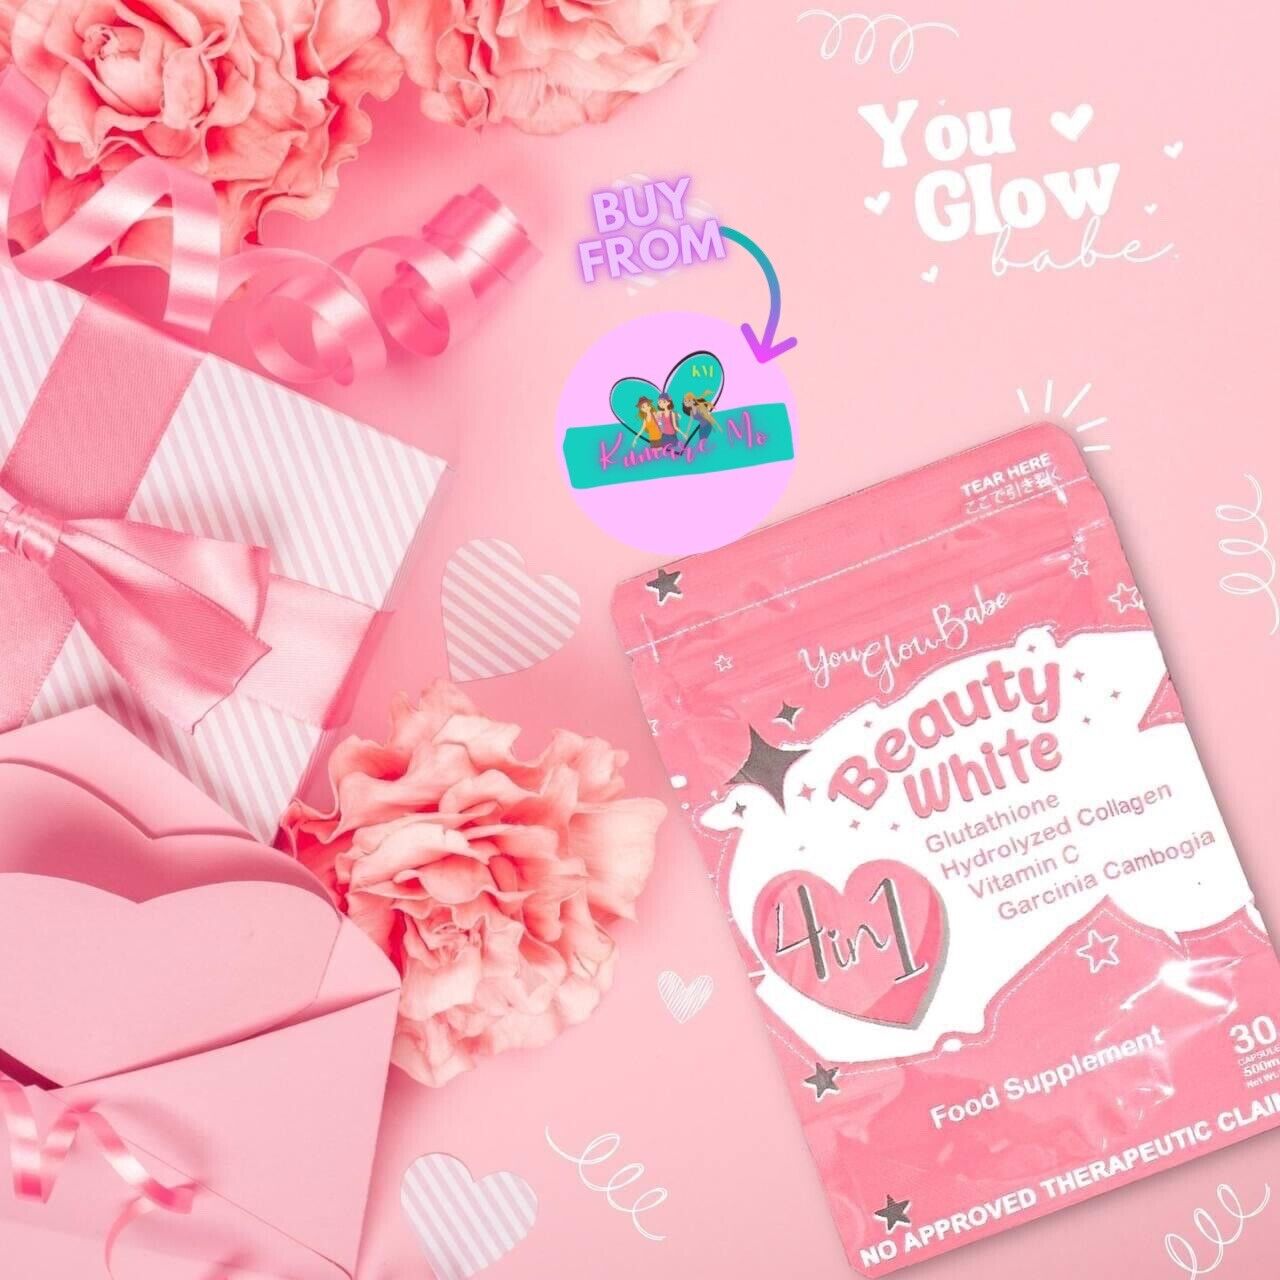 You Glow Babe BEAUTY WHITE Glutathione Collagen Slimming Capsules (x2 Pouches)